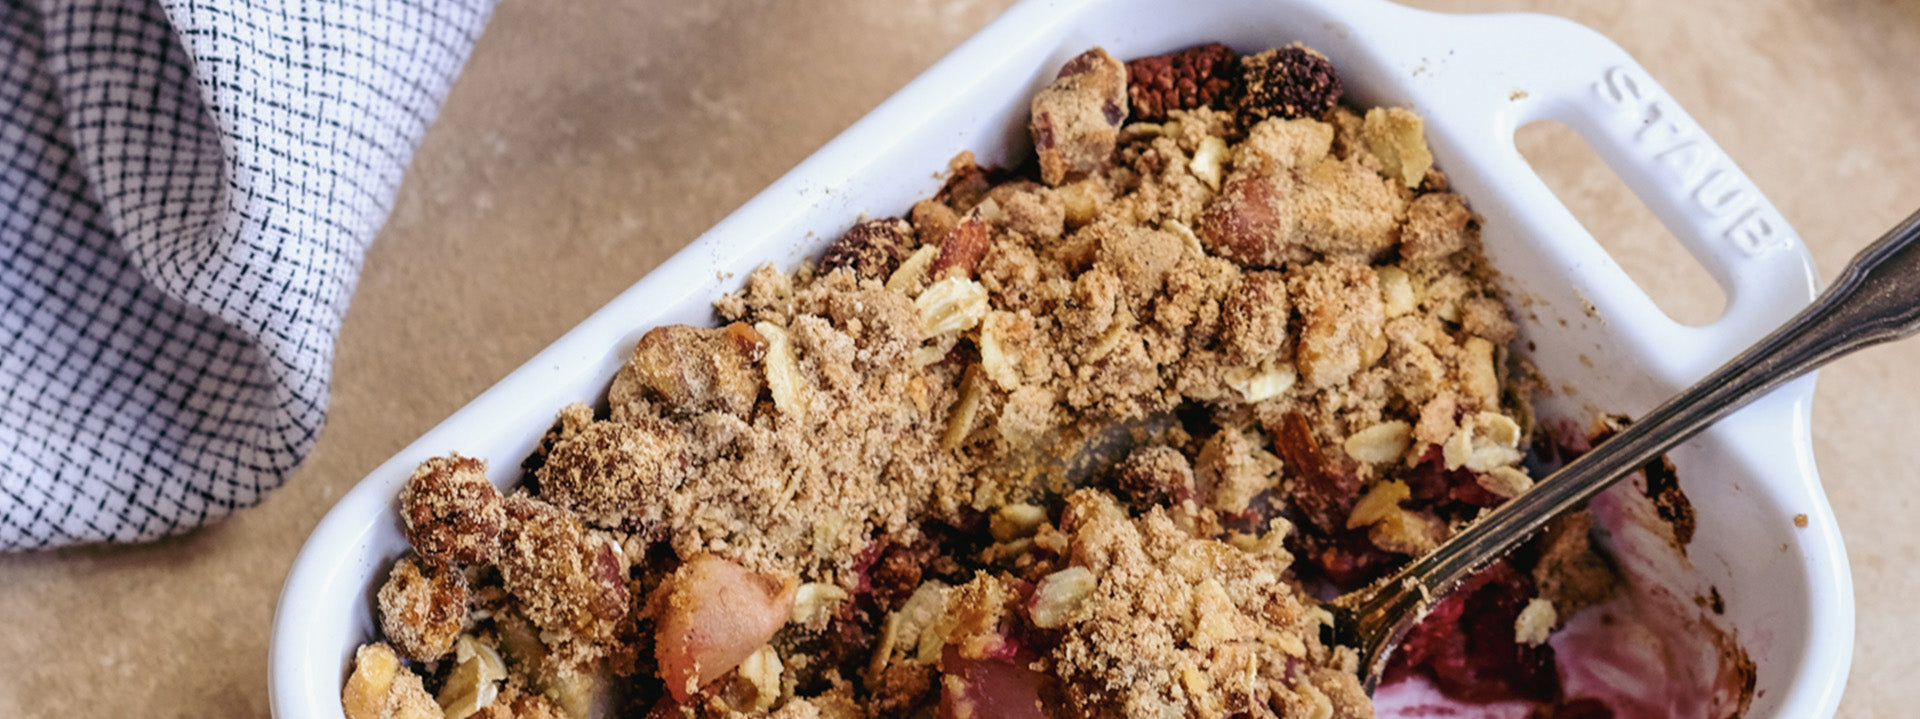 VEGAN CRUMBLE WITH DRIED MULBERRIES